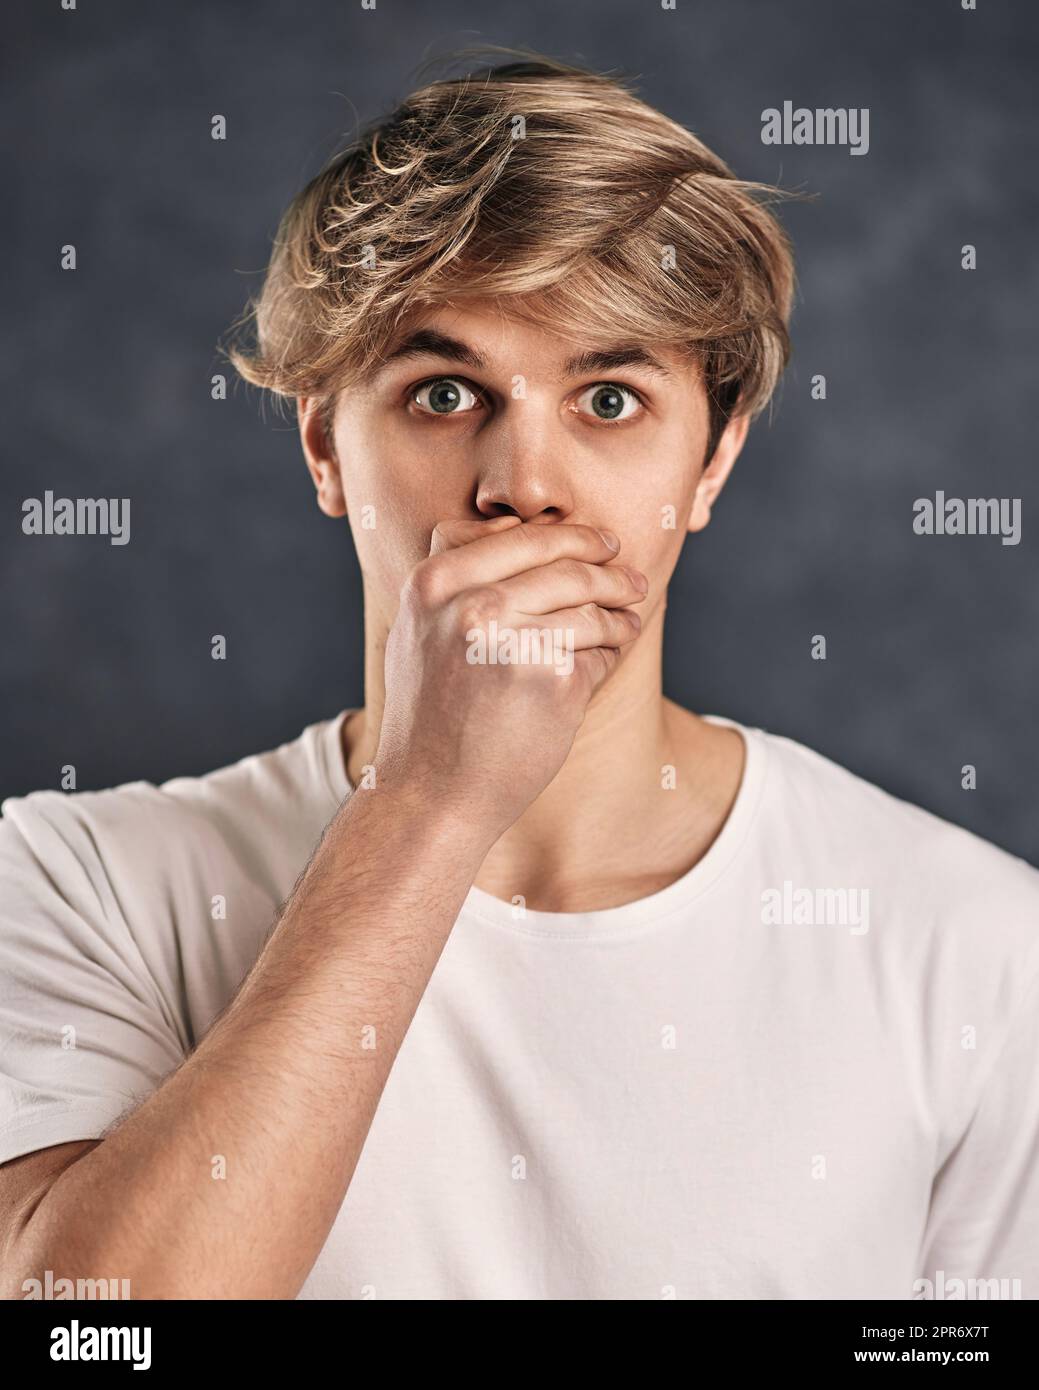 young scared man in t-shirt on gray background. Stock Photo